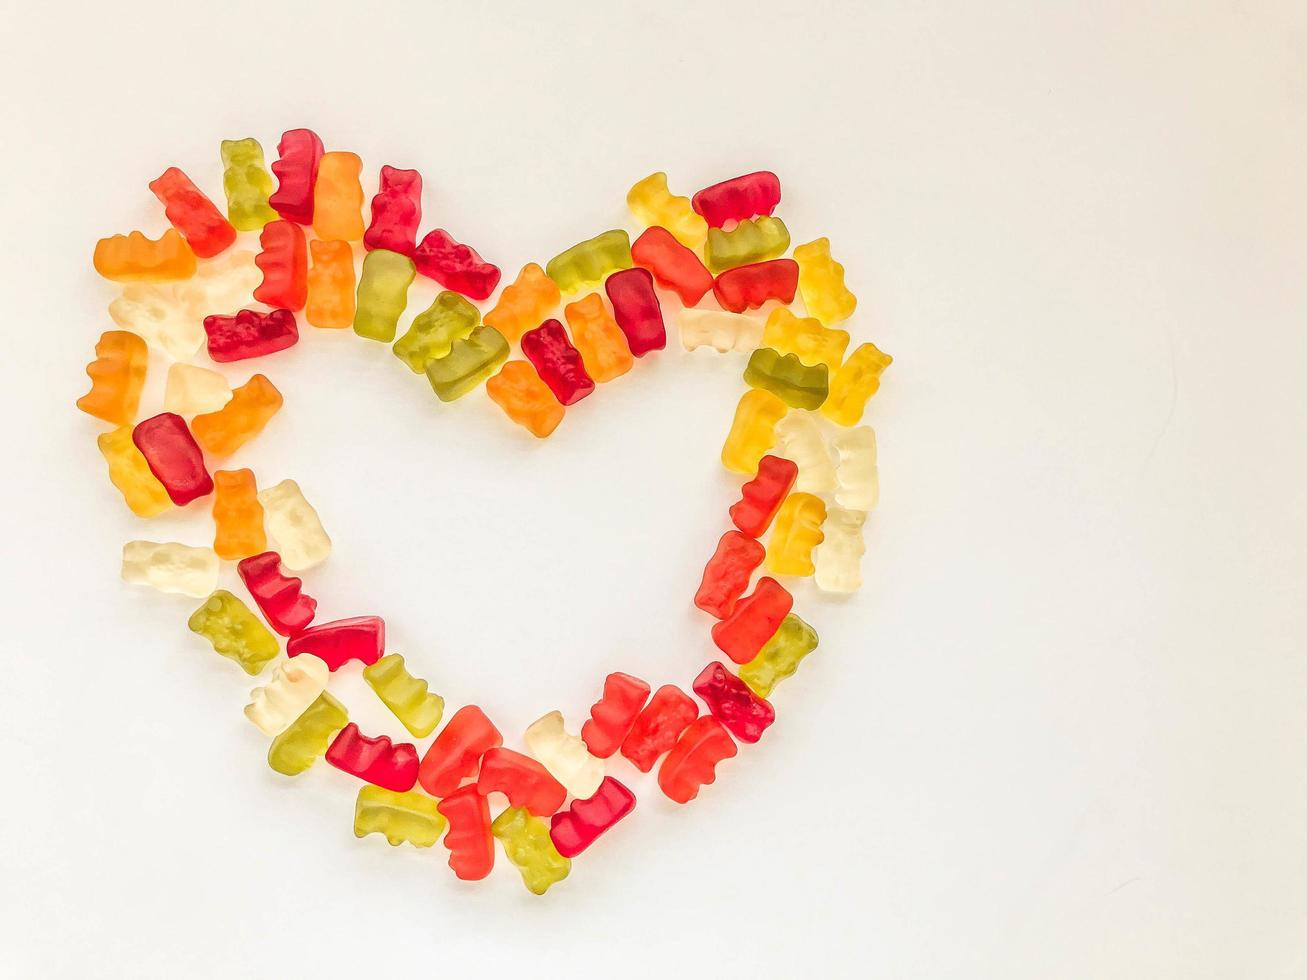 heart made of colored marmalade. Valentine's Day. festive dessert. delicious sweets made from juice, nectars. mouth-watering candies made from natural ingredients photo